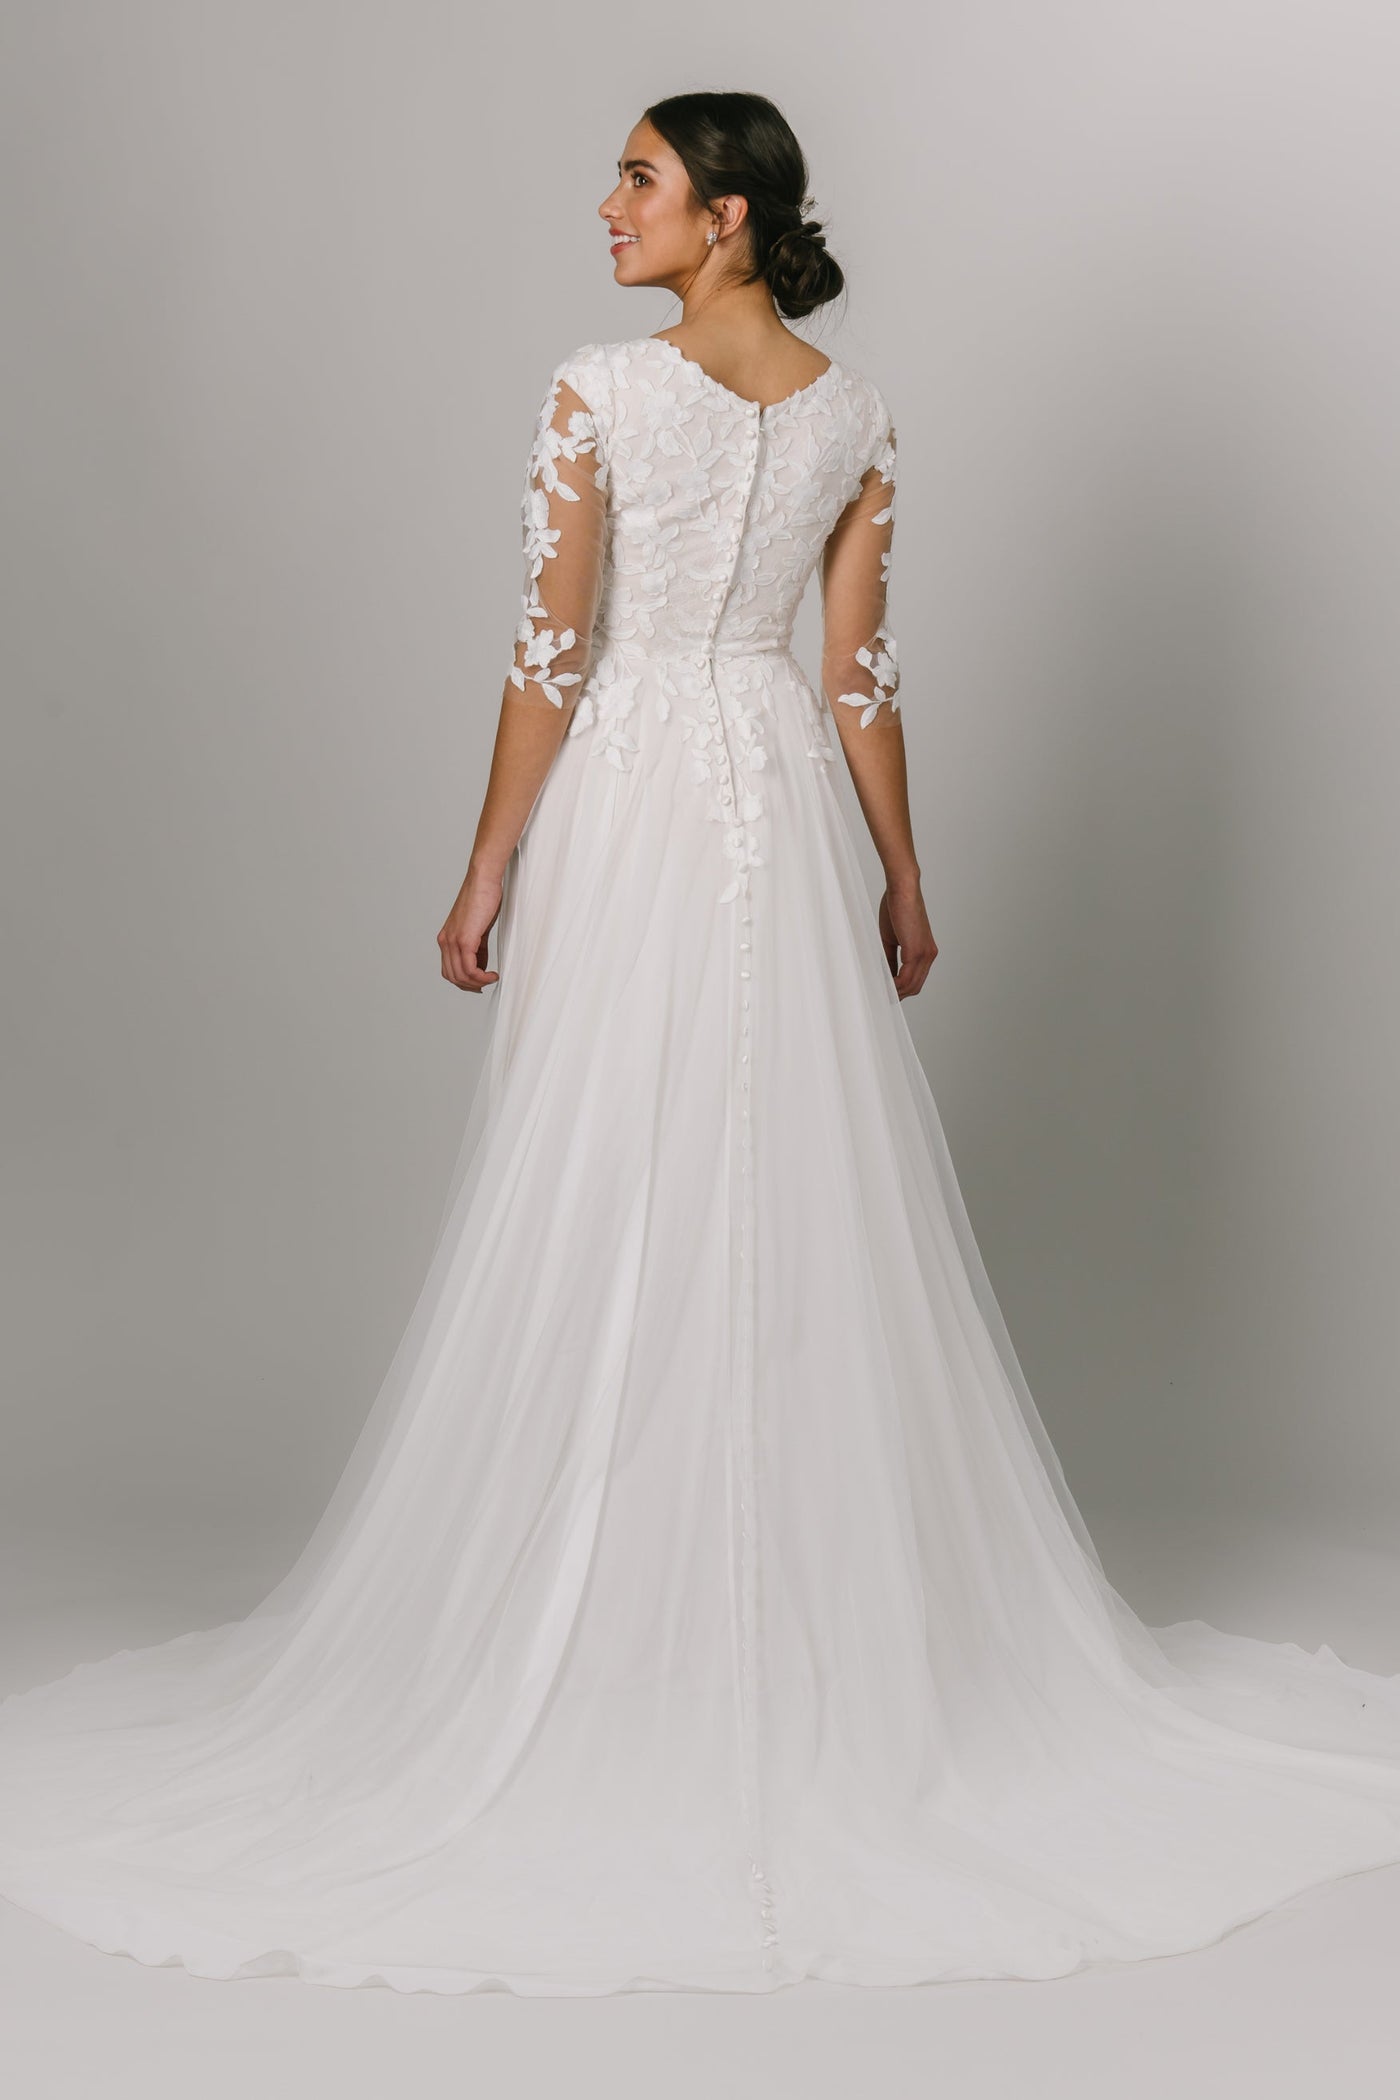 This Modest Wedding Dress features illusion sleeves, a soft V-neckline and an A-line skirt. - Modest Wedding Dresses - Modest Dresses - Modest Clothing - LatterDayBride